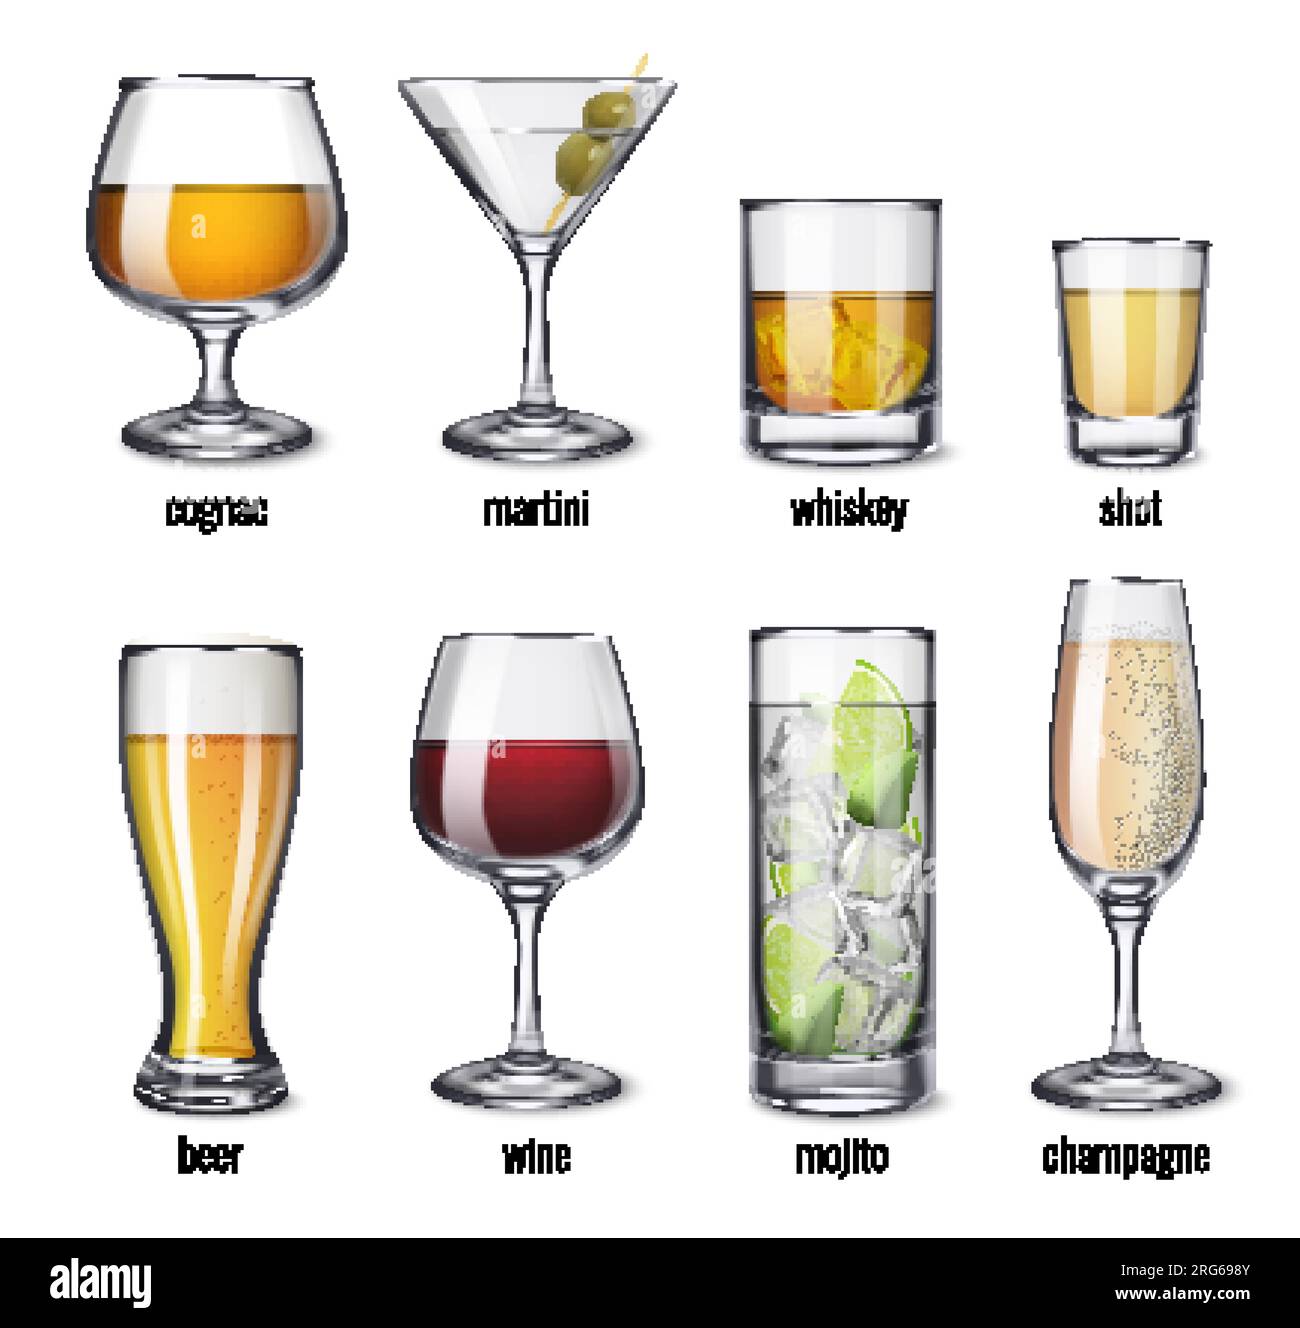 https://c8.alamy.com/comp/2RG698Y/alcohol-drinks-glassware-set-with-isolated-realistic-icons-of-glasses-with-champagne-beer-wine-and-whiskey-vector-illustration-2RG698Y.jpg